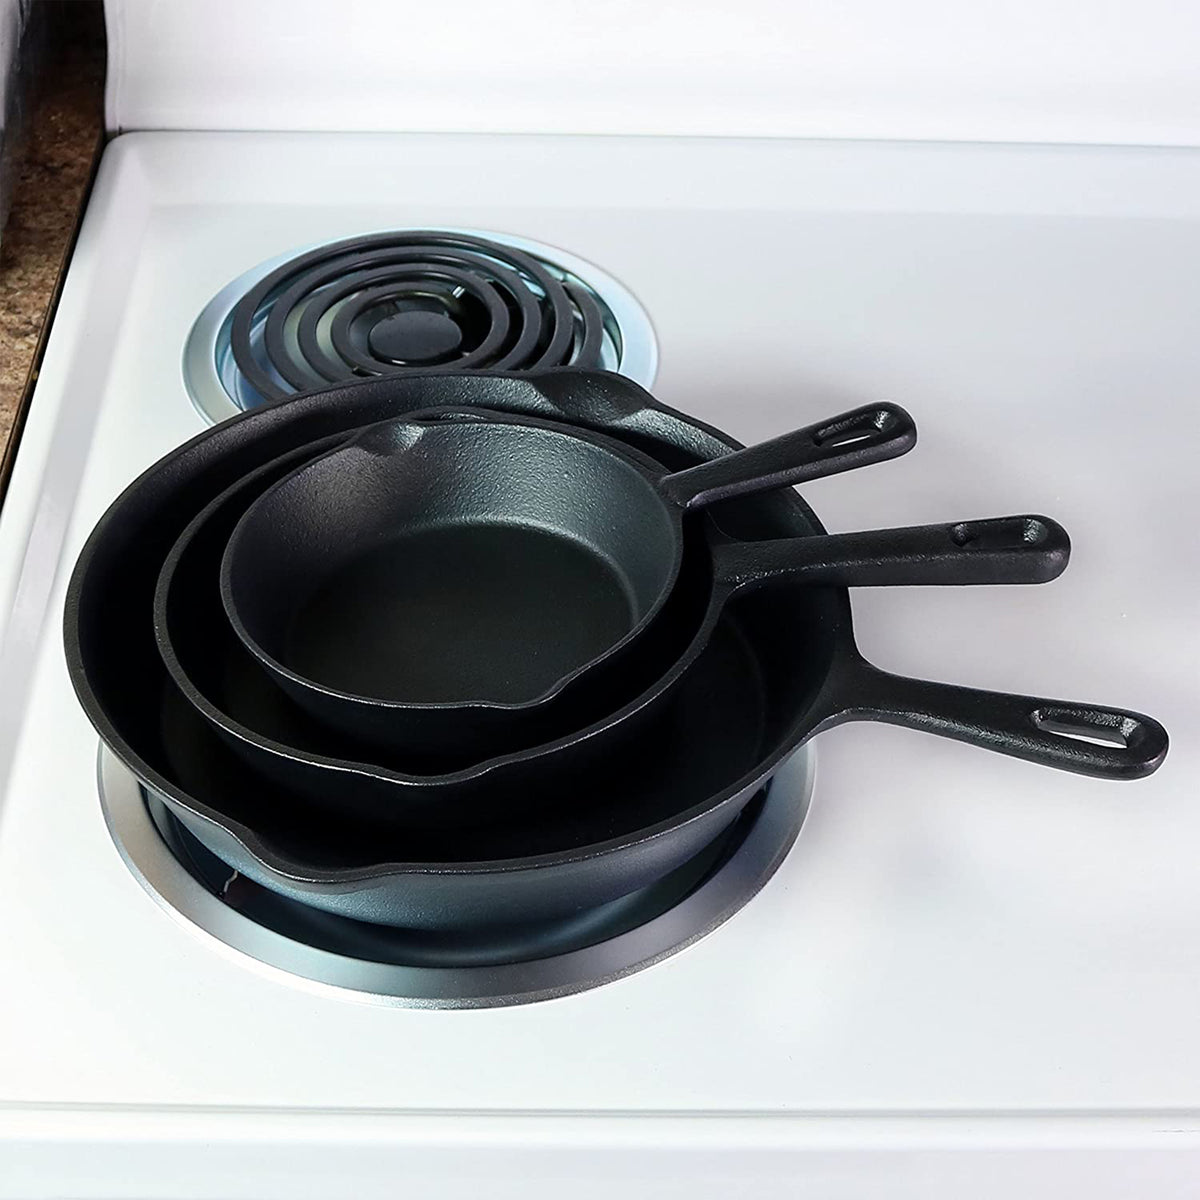 3 in 1 DIVIDE WONDER PAN SET NON-STICK CATATED SKILLET SECTION